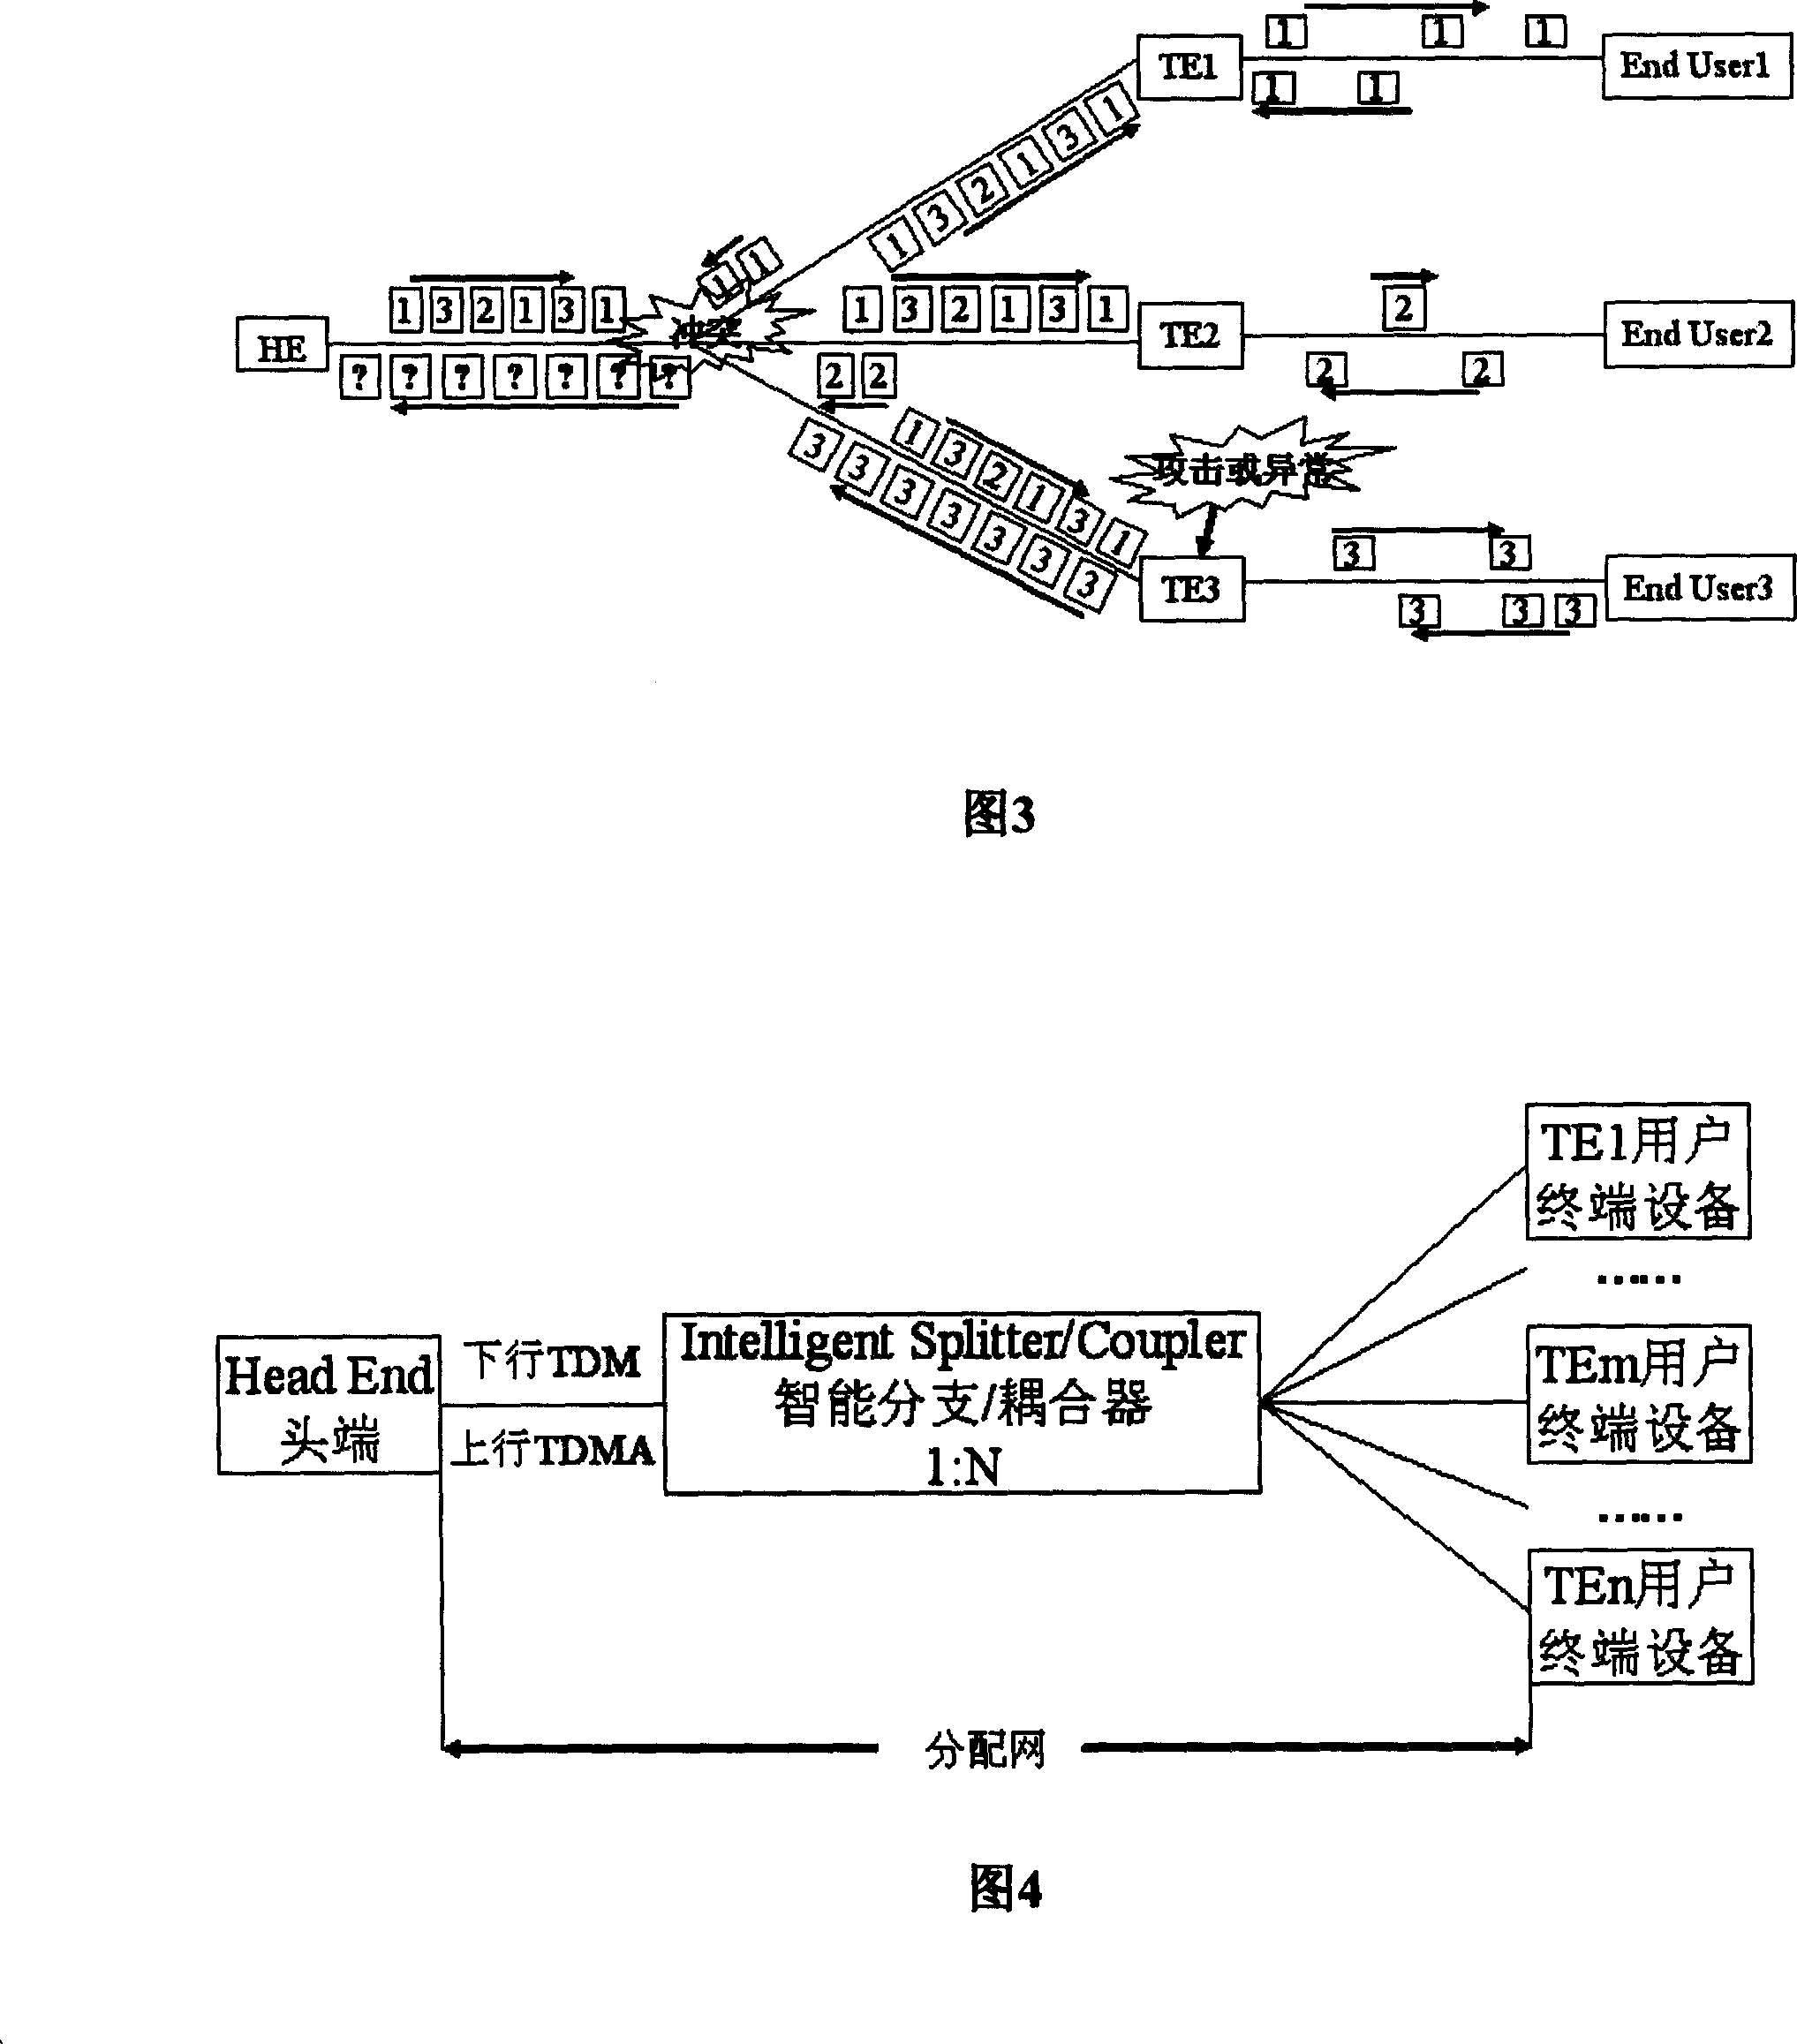 Point-to-multipoint access network and method to enhance security and branch/coupler